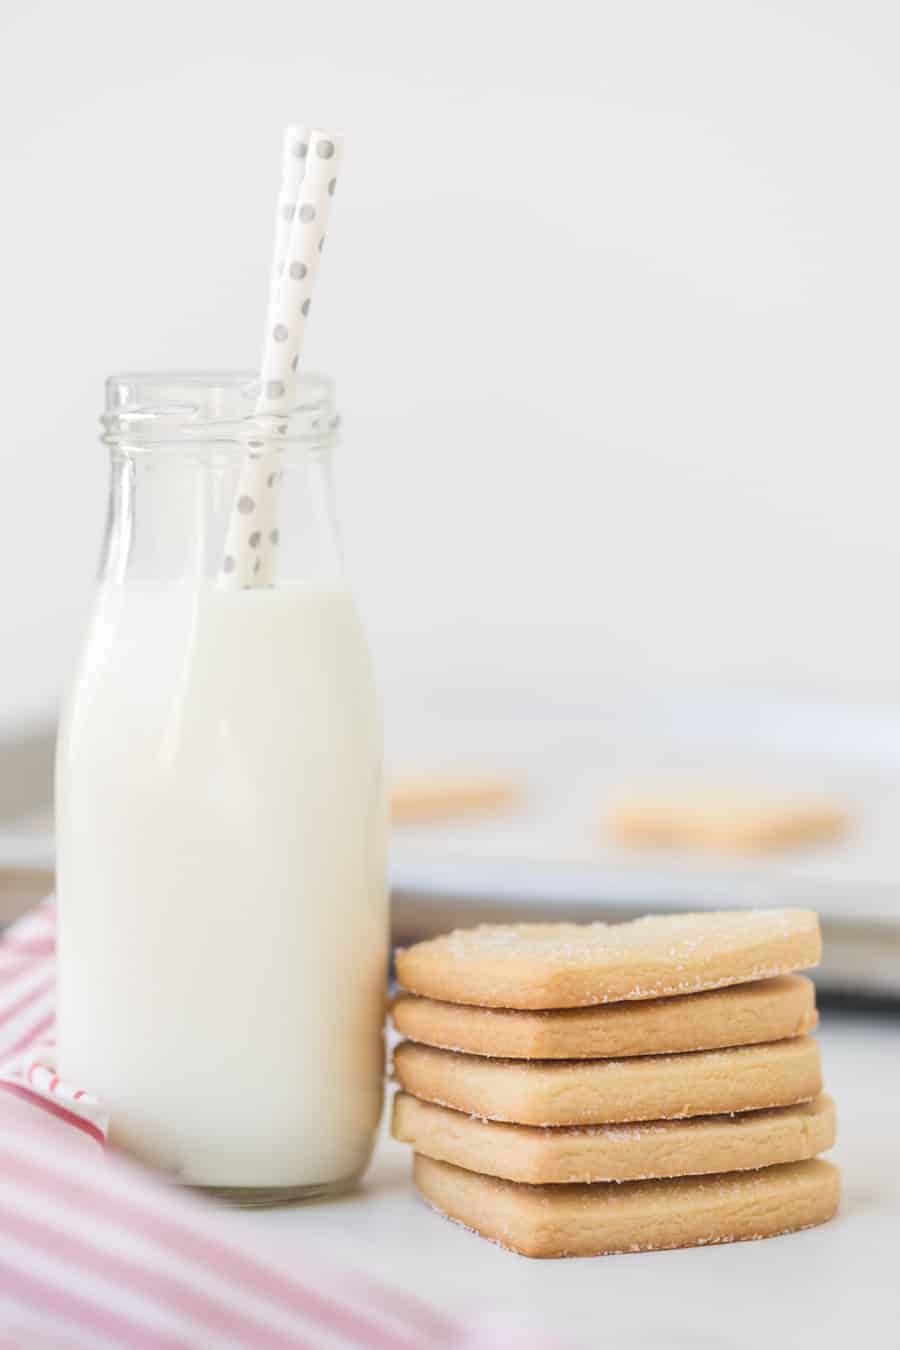 A glass jug of milk with two white straws polka dotted with silver, next to a stack of heart shaped shortbread cookies.